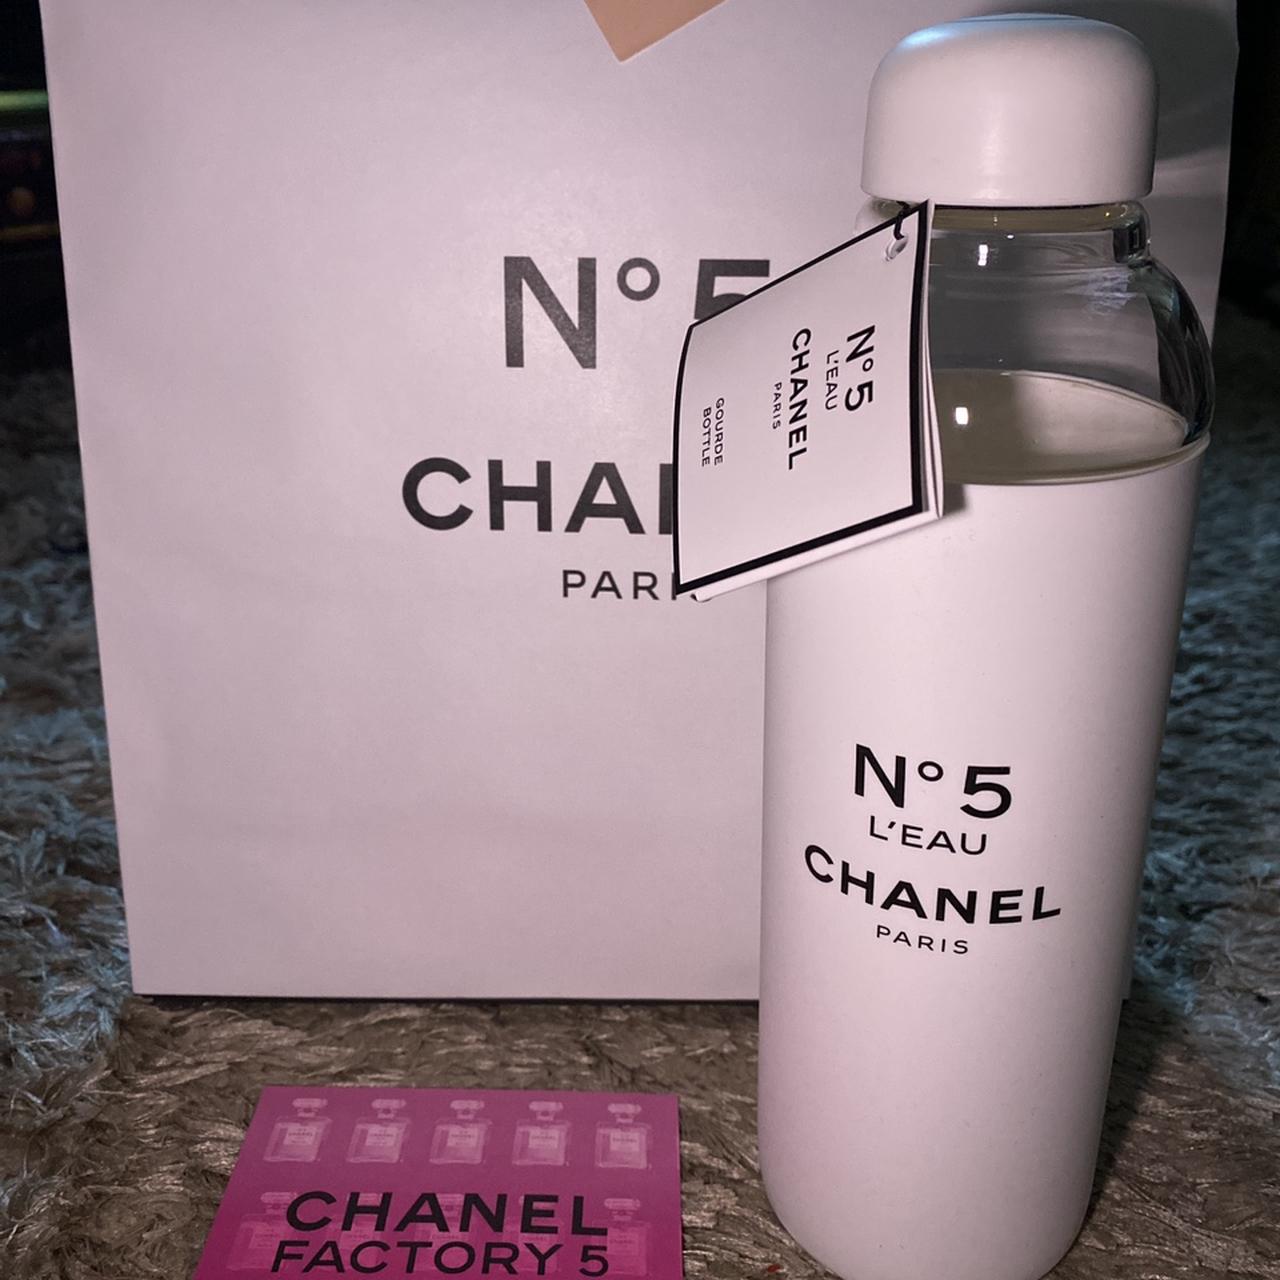 Chanel Water Bottle, Chanel factory , Can provide